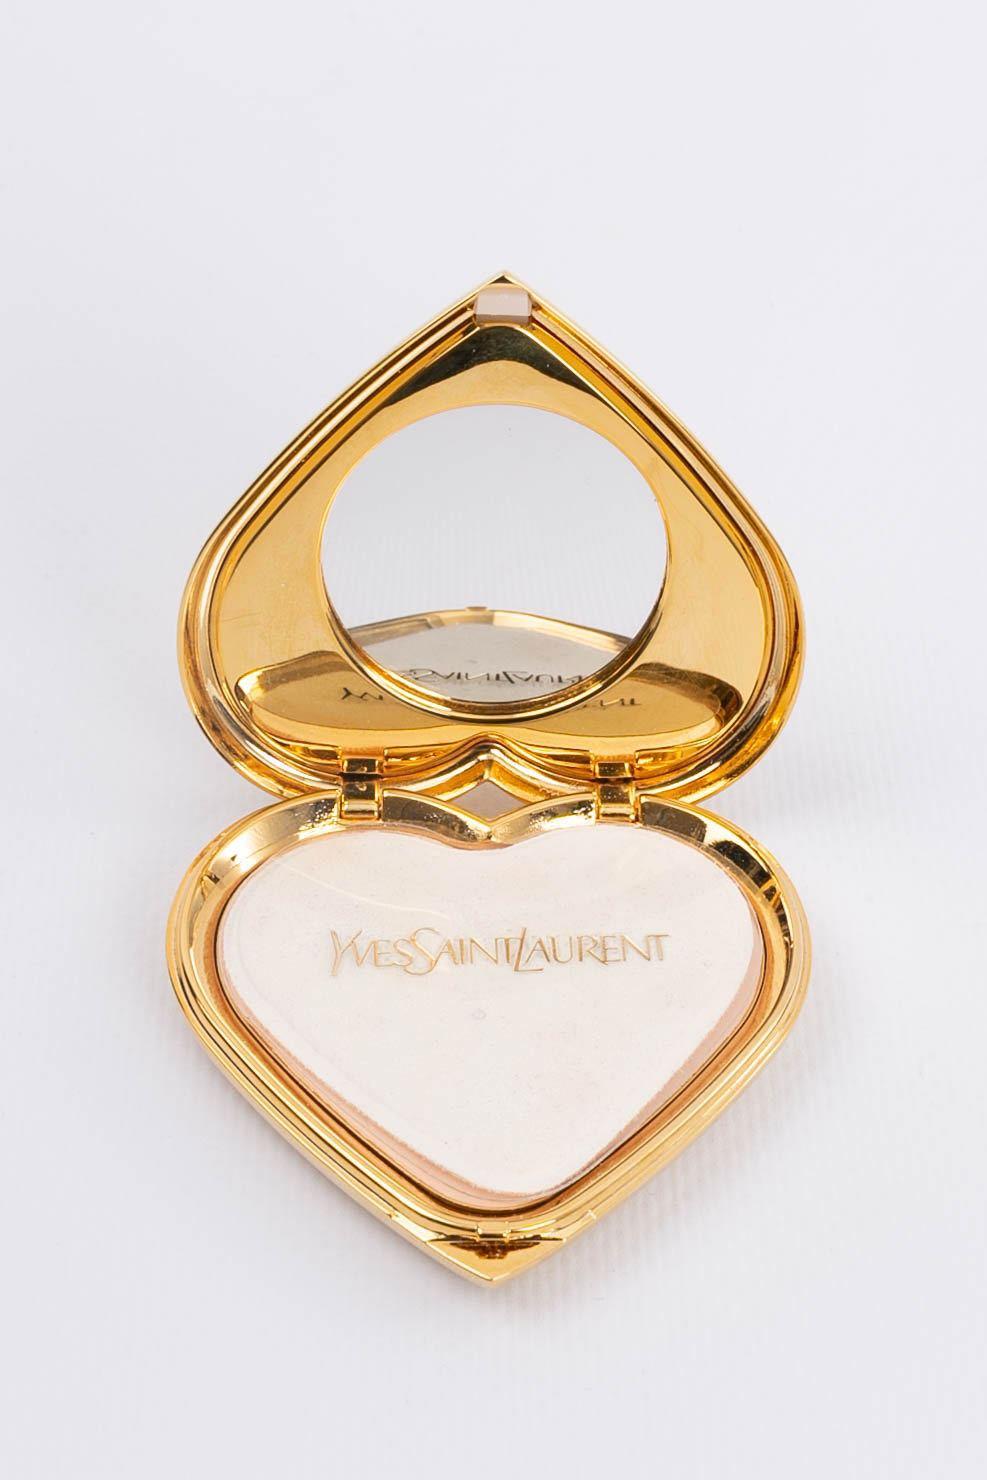 Yves Saint Laurent Gilded Metal Compact in Heart Shape In Excellent Condition For Sale In SAINT-OUEN-SUR-SEINE, FR